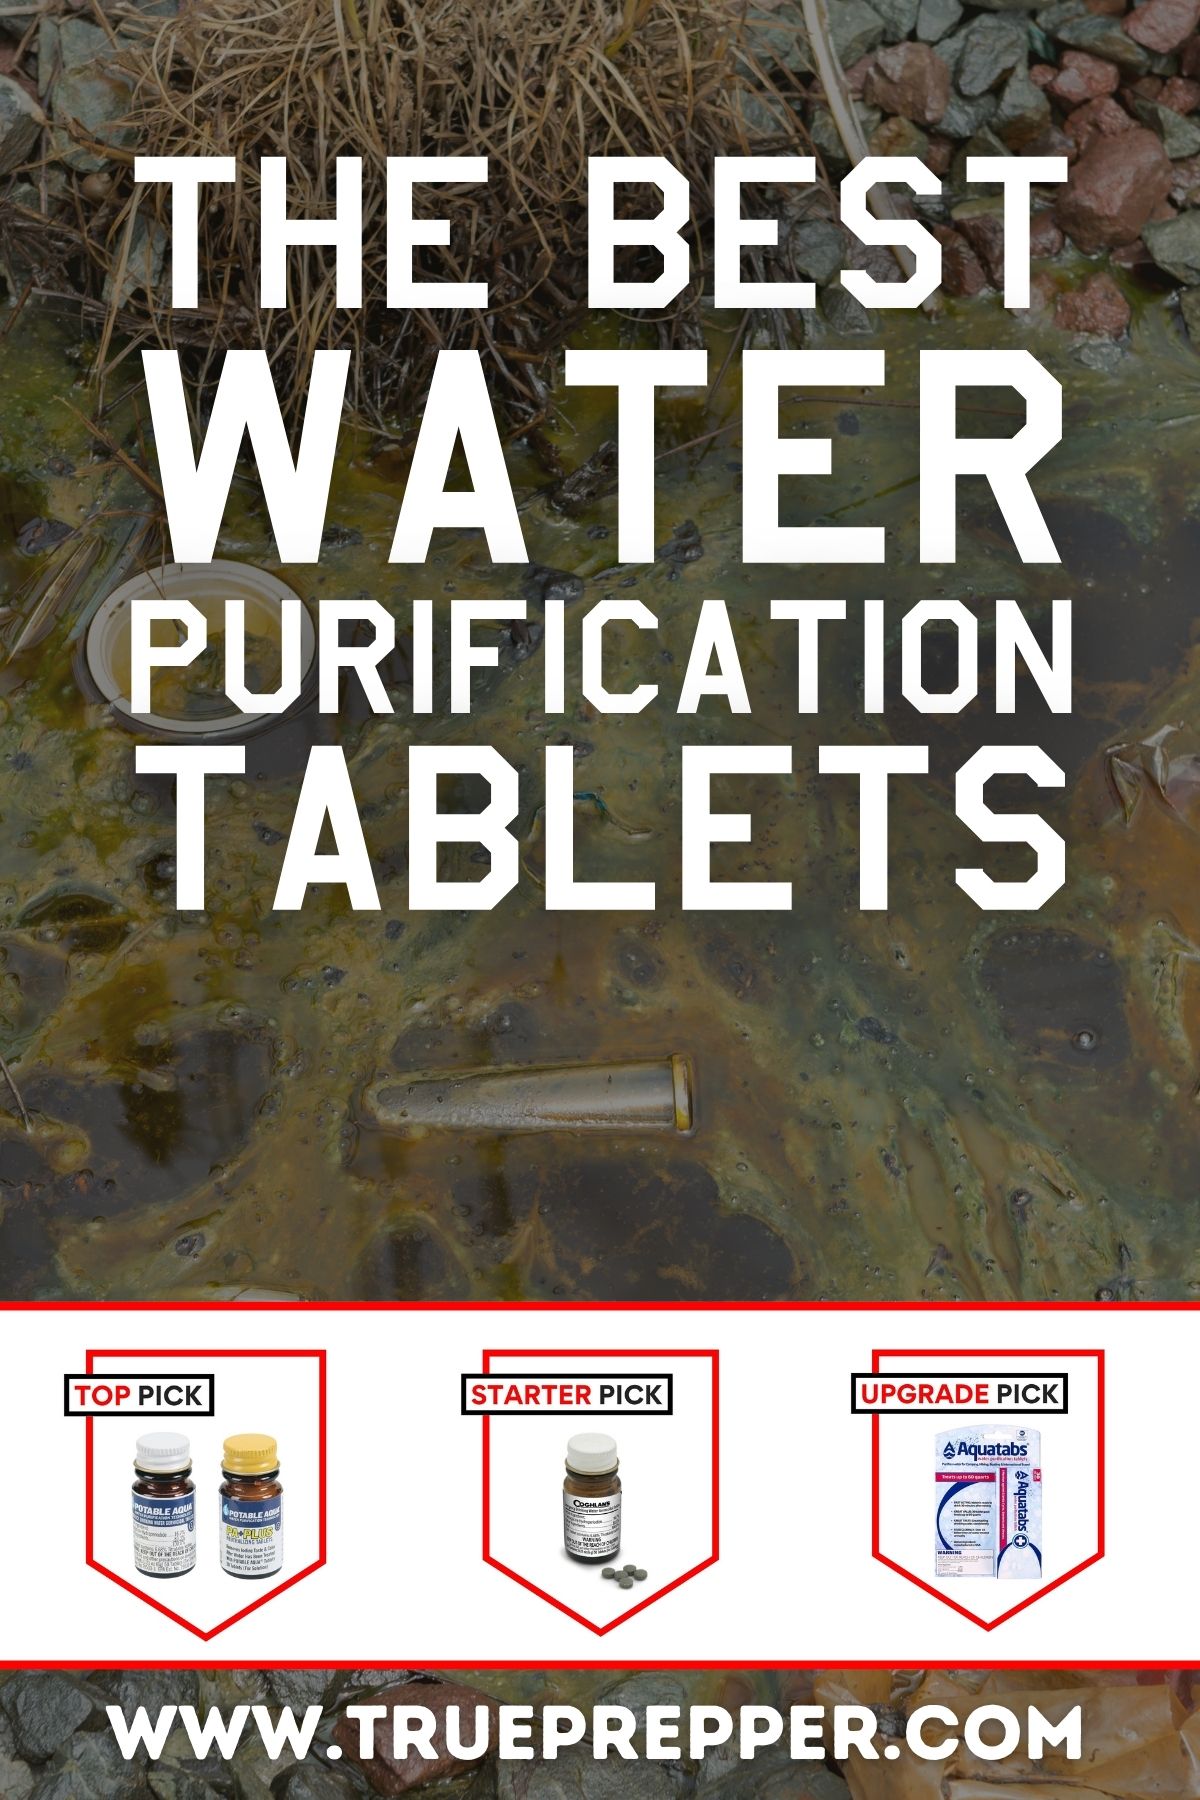 The Best Water Purification Tablets